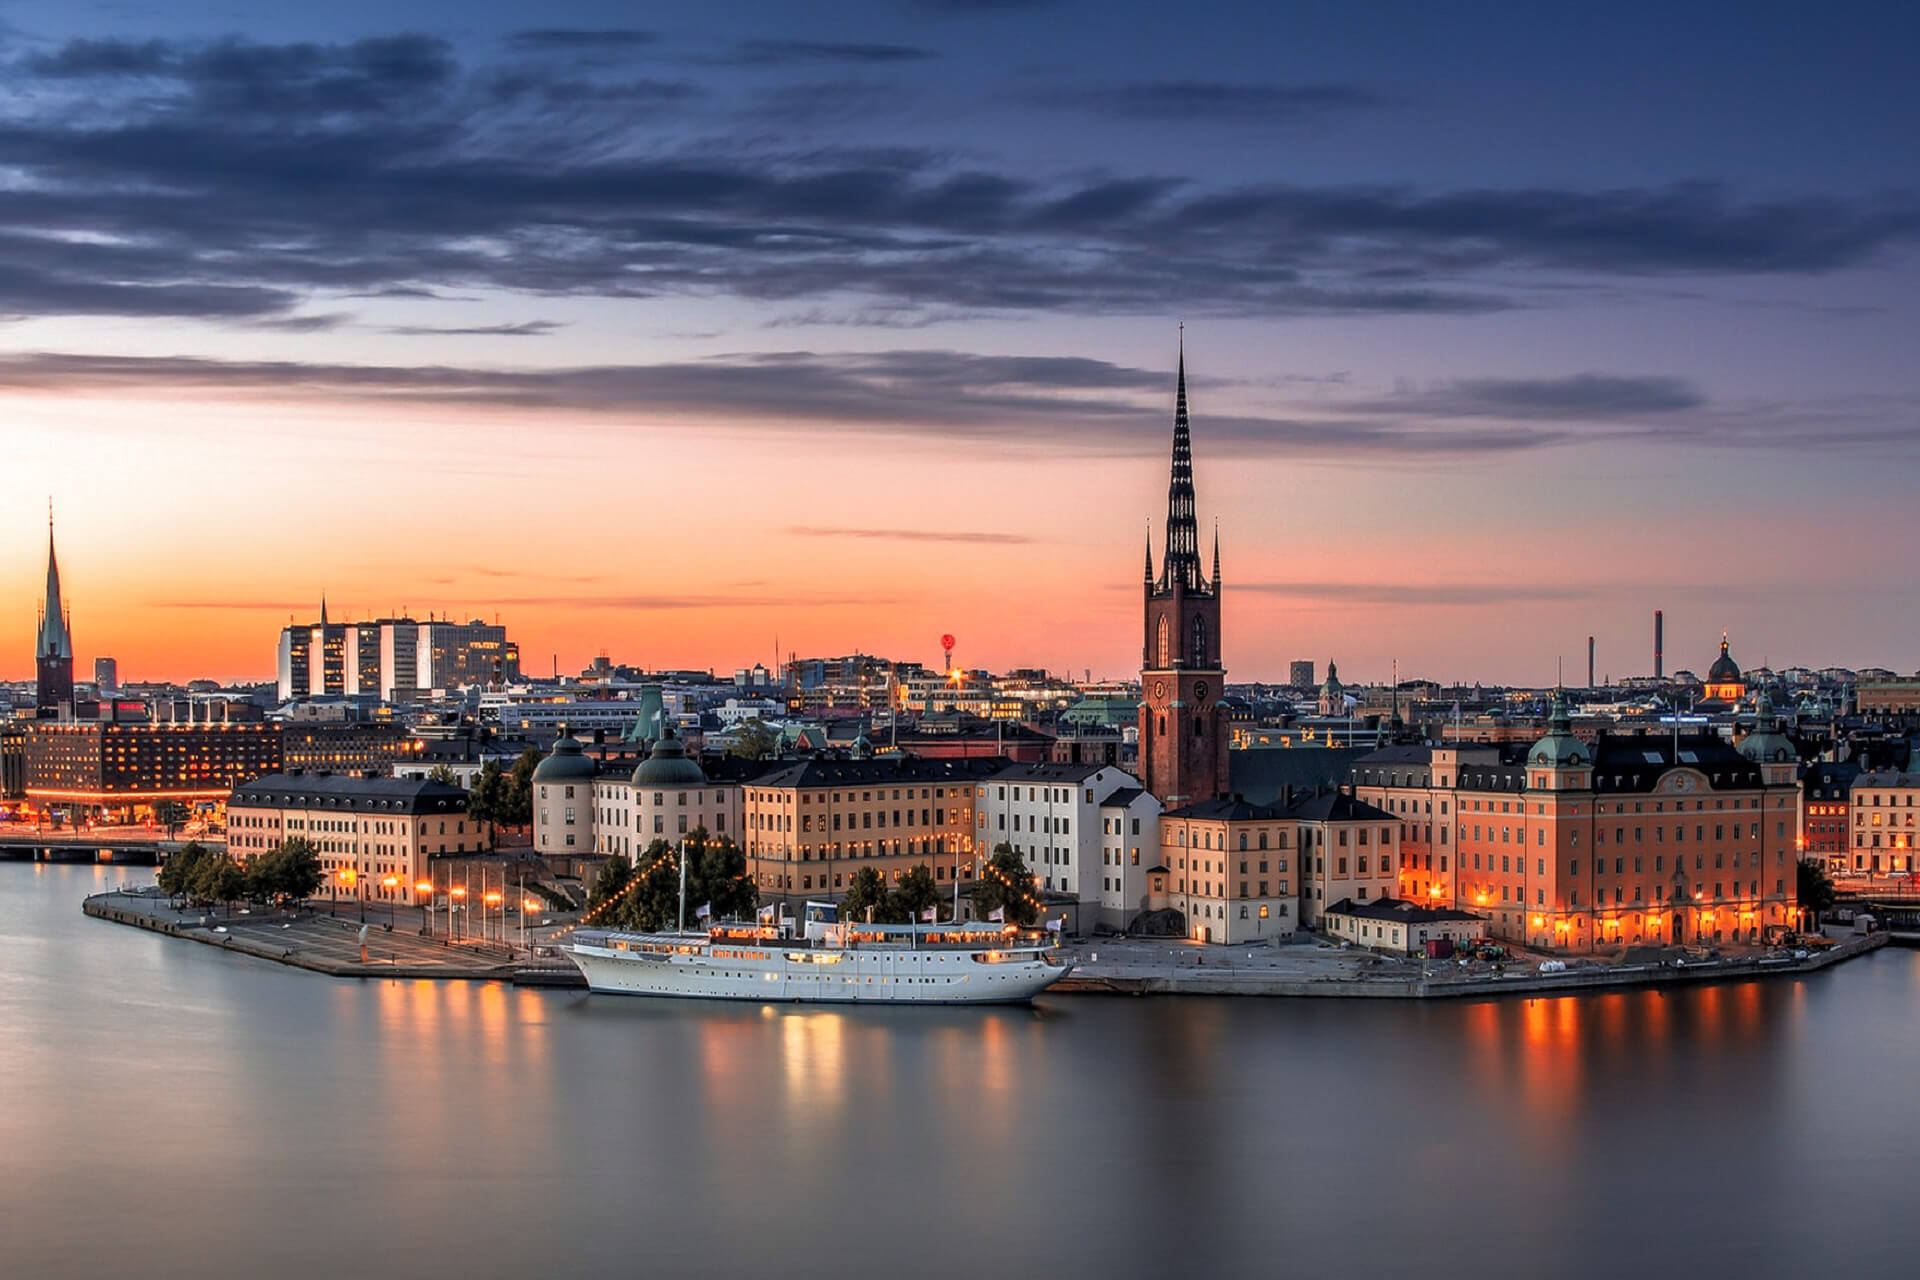 Stockholm - Venice Of The North